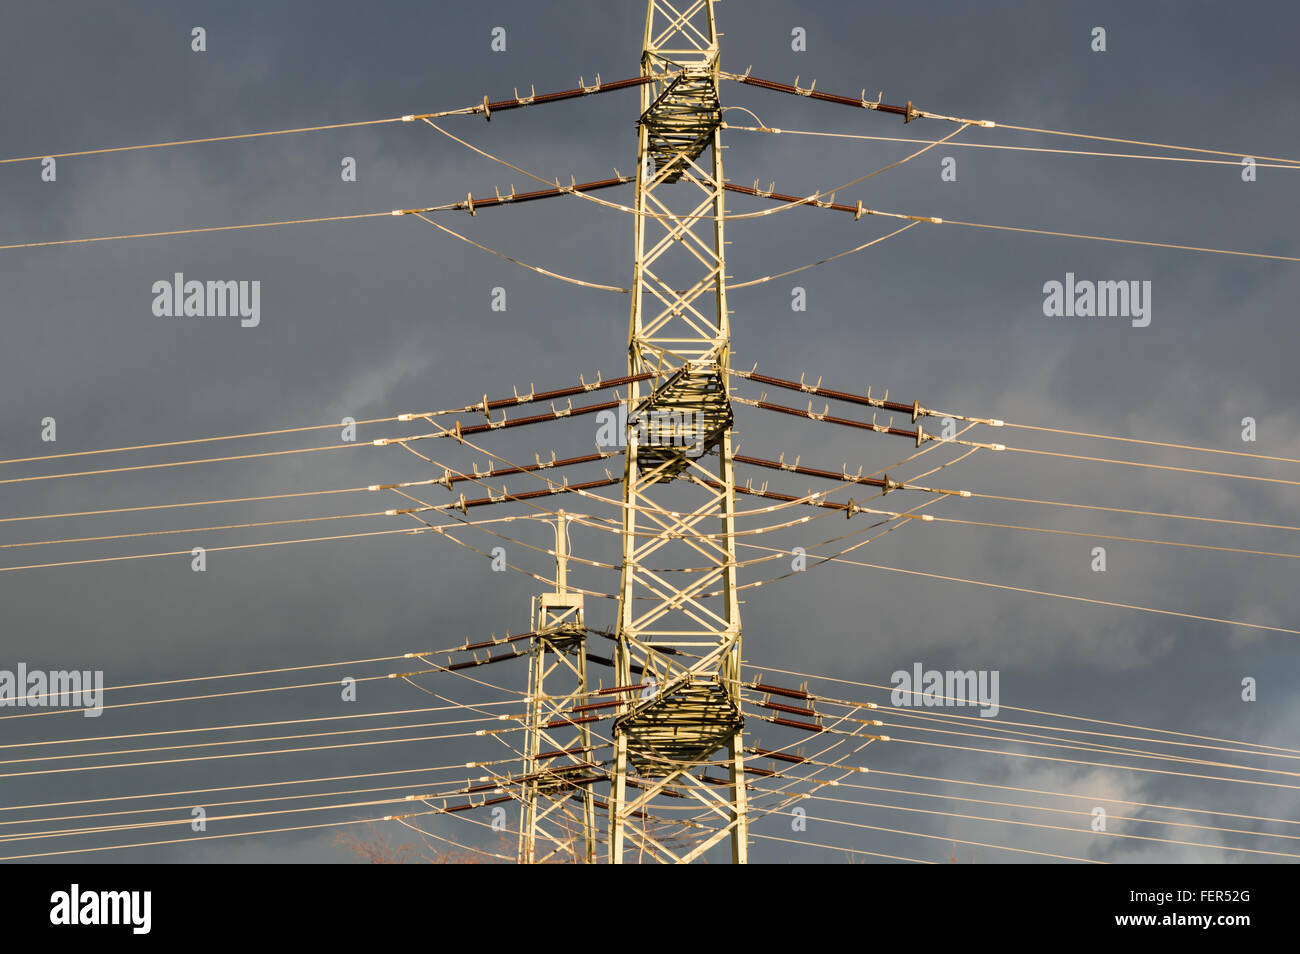 high-voltage electricity pylons against blue sky with rain clouds Stock Photo